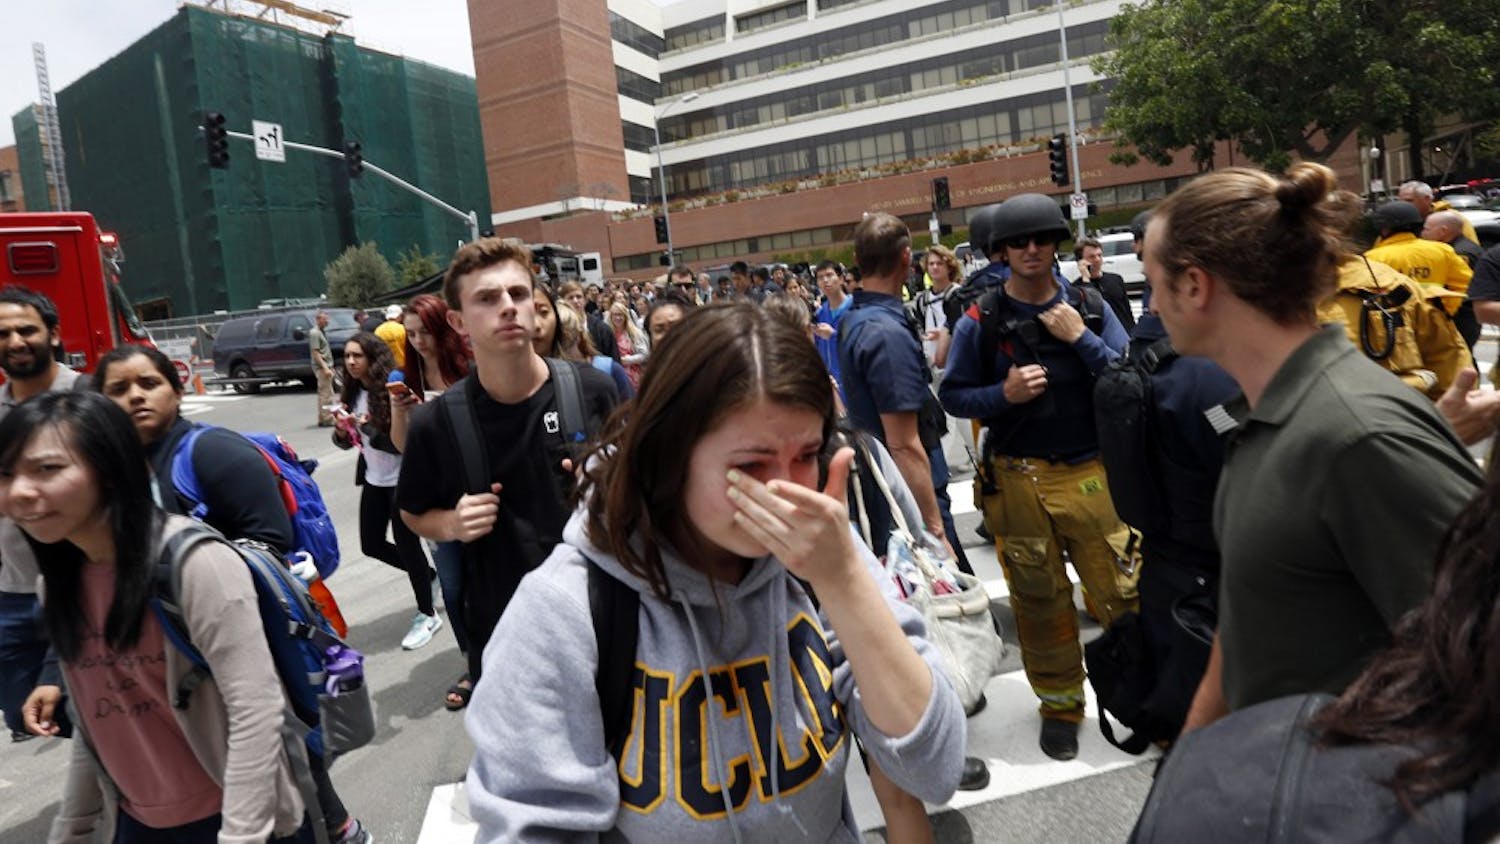 A tearful UCLA student joins hundreds of other students as they leave the UCLA campus after the lockdown was called off on Wednesday, June 1, 2016. (Genaro Molina/Los Angeles Times/TNS)